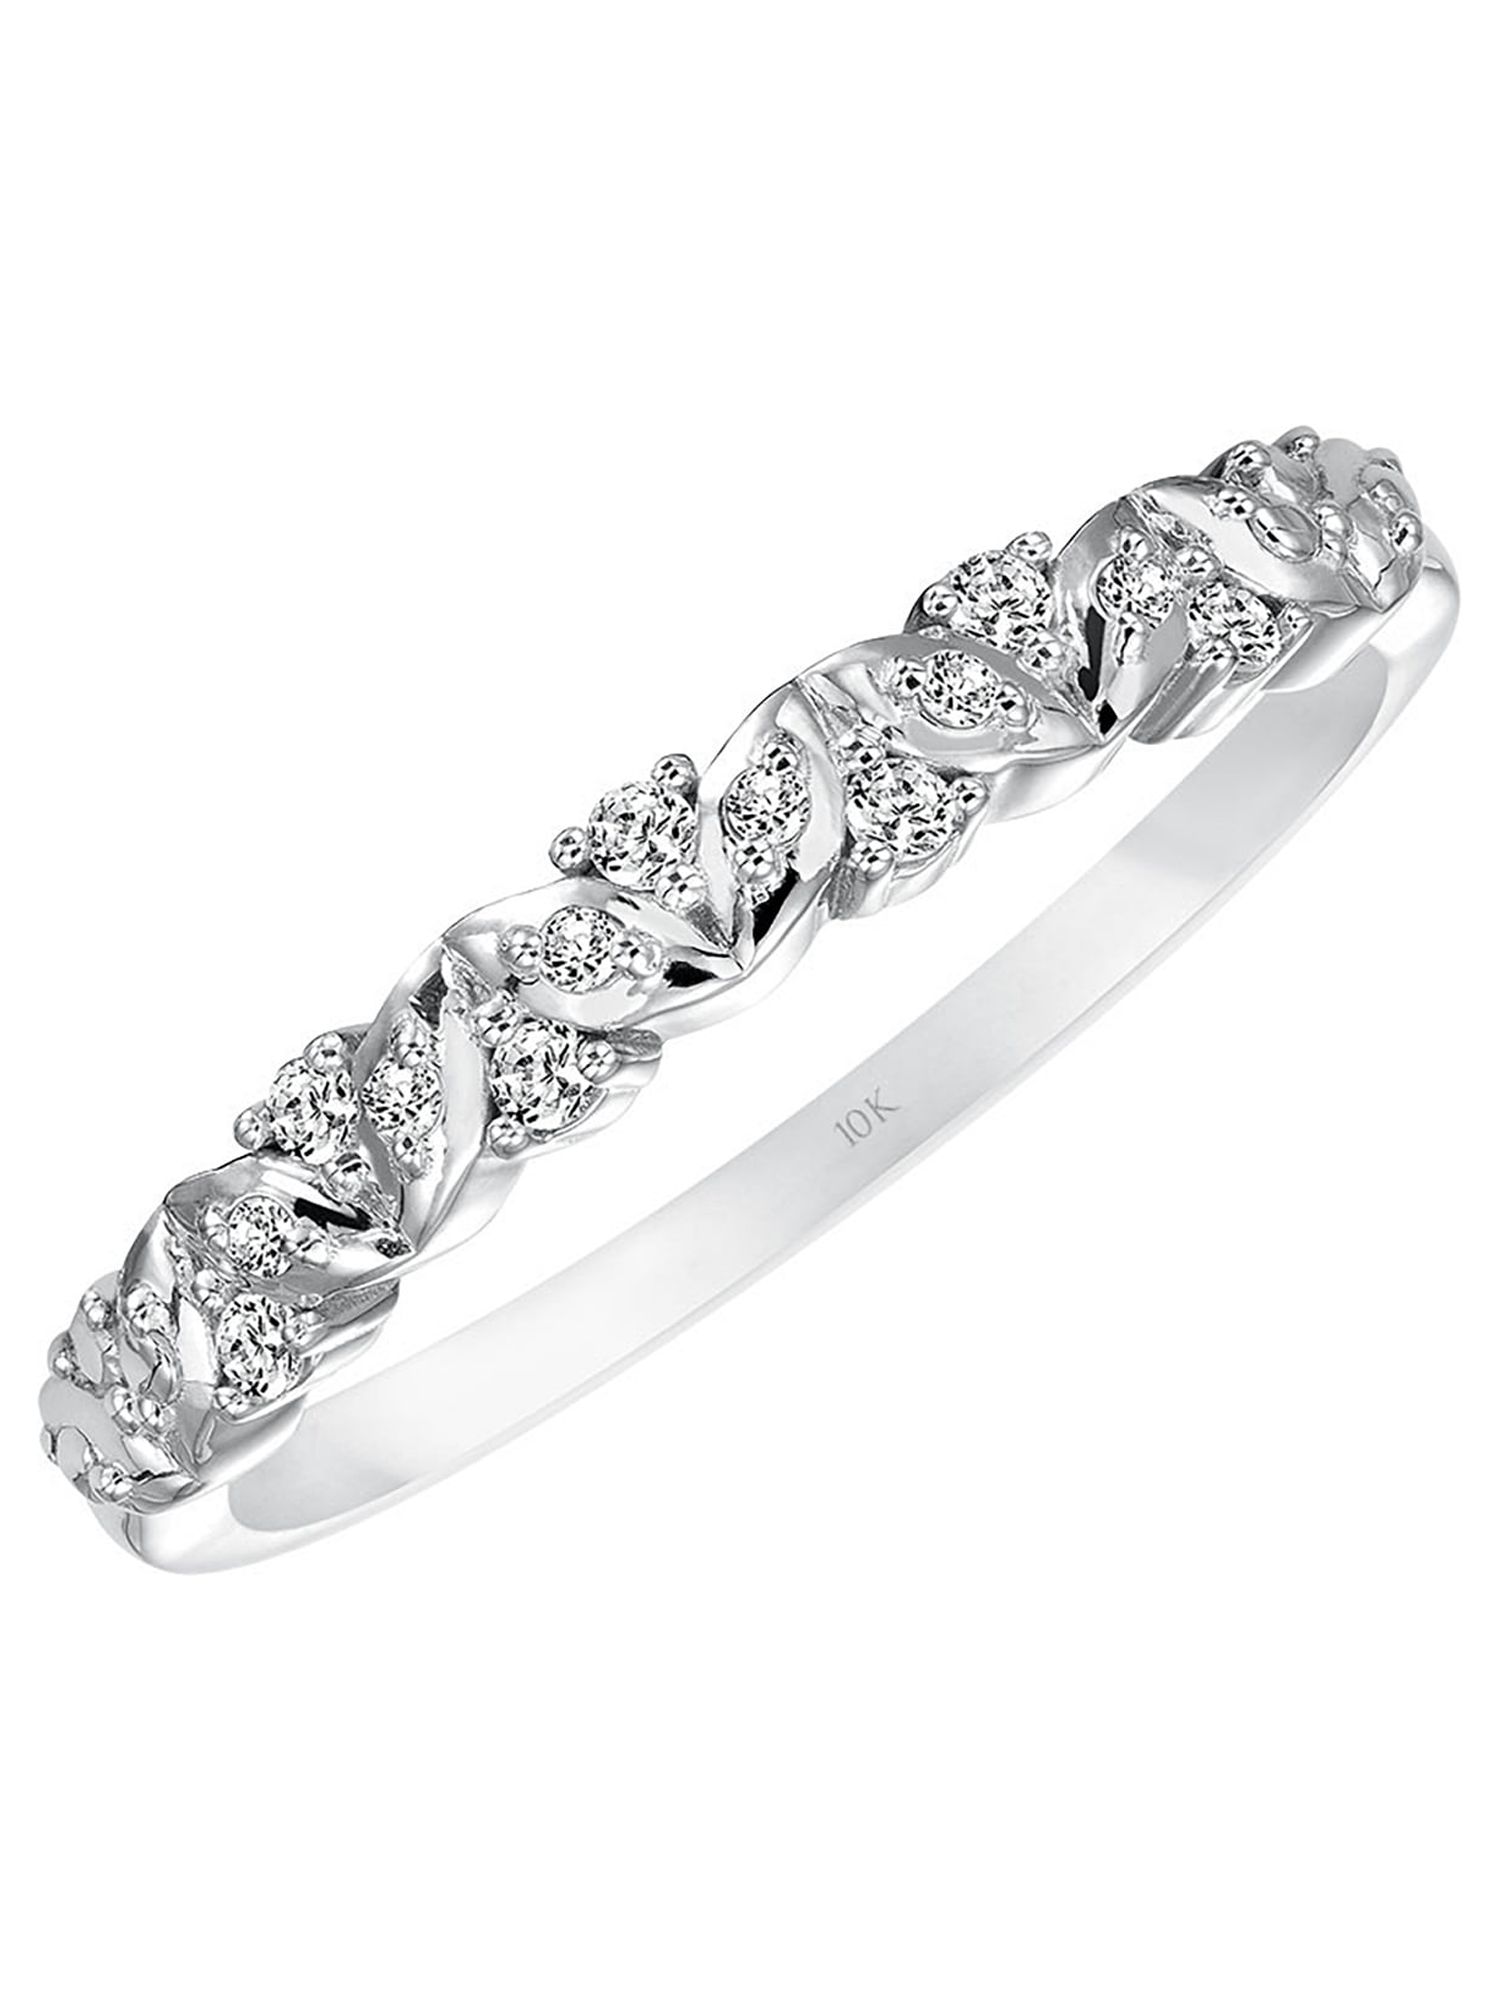 Sweet Remembrance 1/10 Carat T.W. Certified Diamond 10kt White Gold Women's Anniversary Band - image 1 of 7